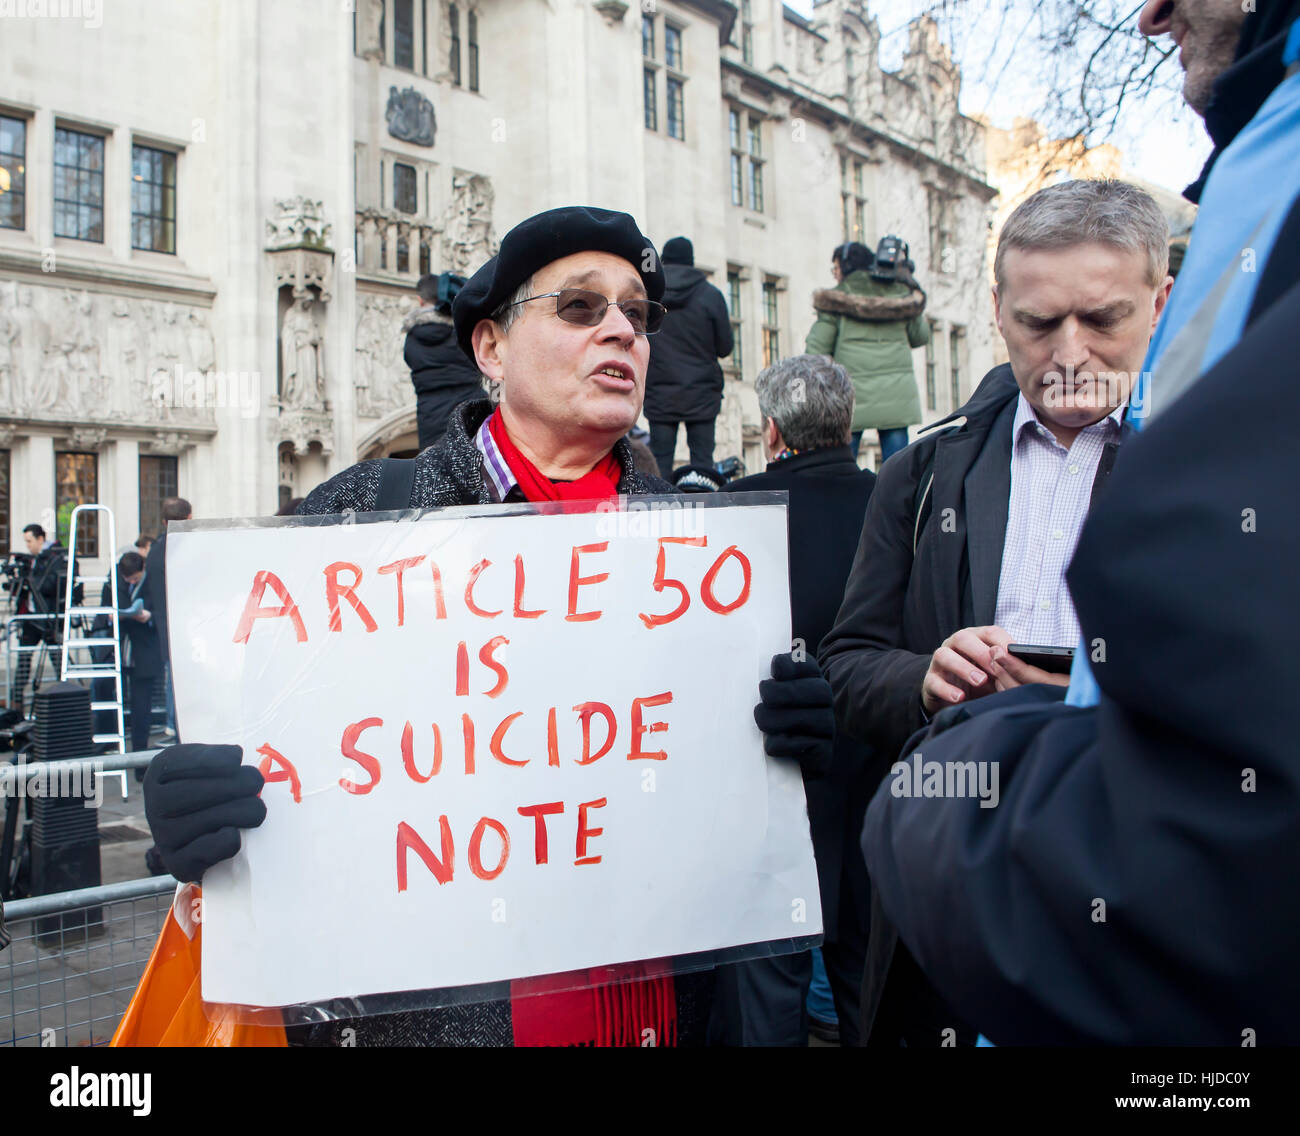 London, UK. 24th Jan, 2017. Verdict of the Supreme Court. The verdict of the Supreme Court was given today. Remain supporters were interviewed outside the court. Credit: Jane Campbell/Alamy Live News Stock Photo